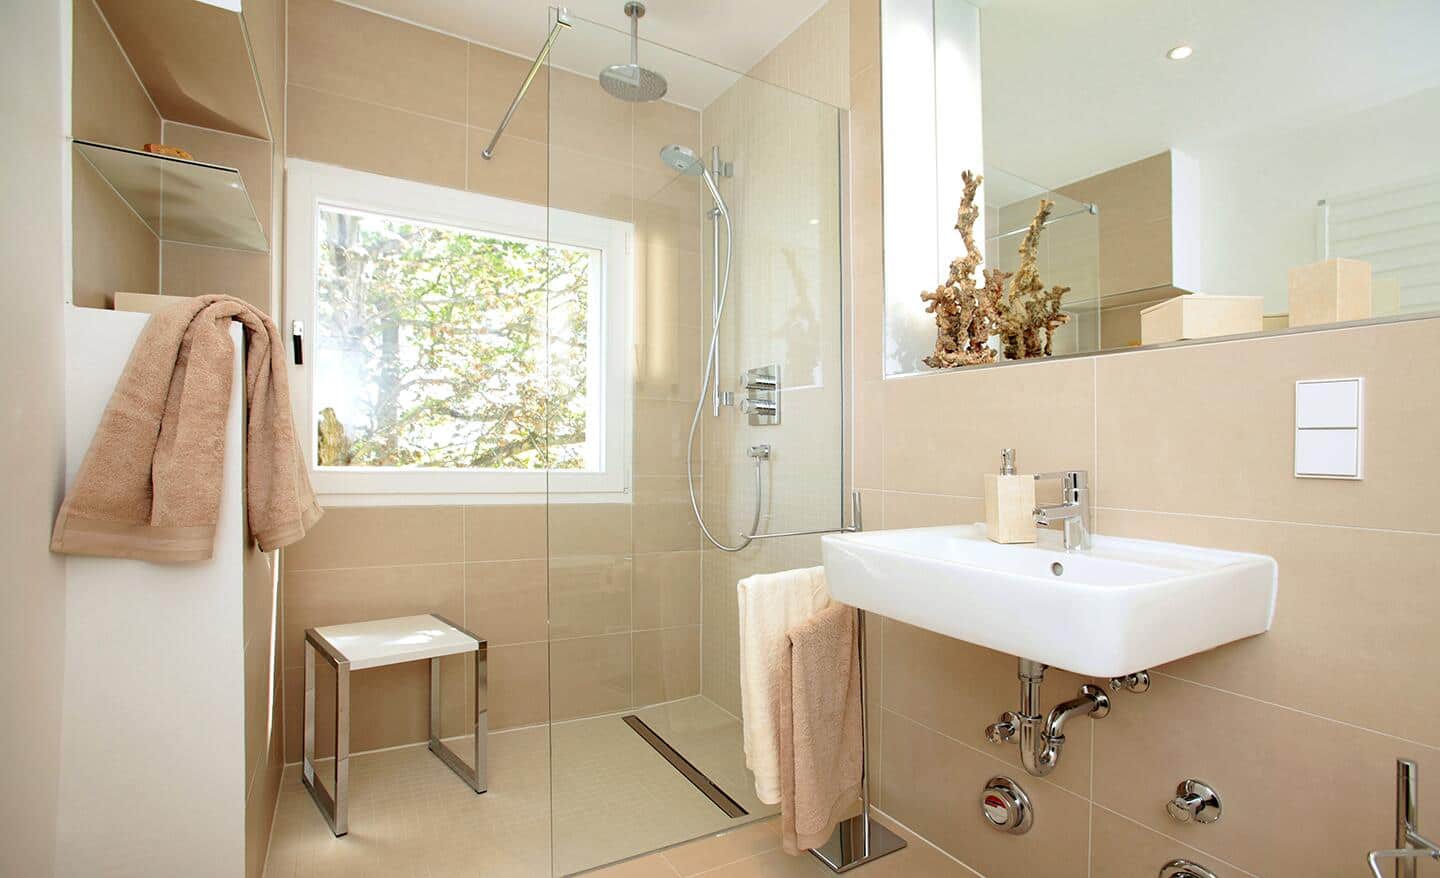 A walk-in small bath installed with a fixed panel shower door.